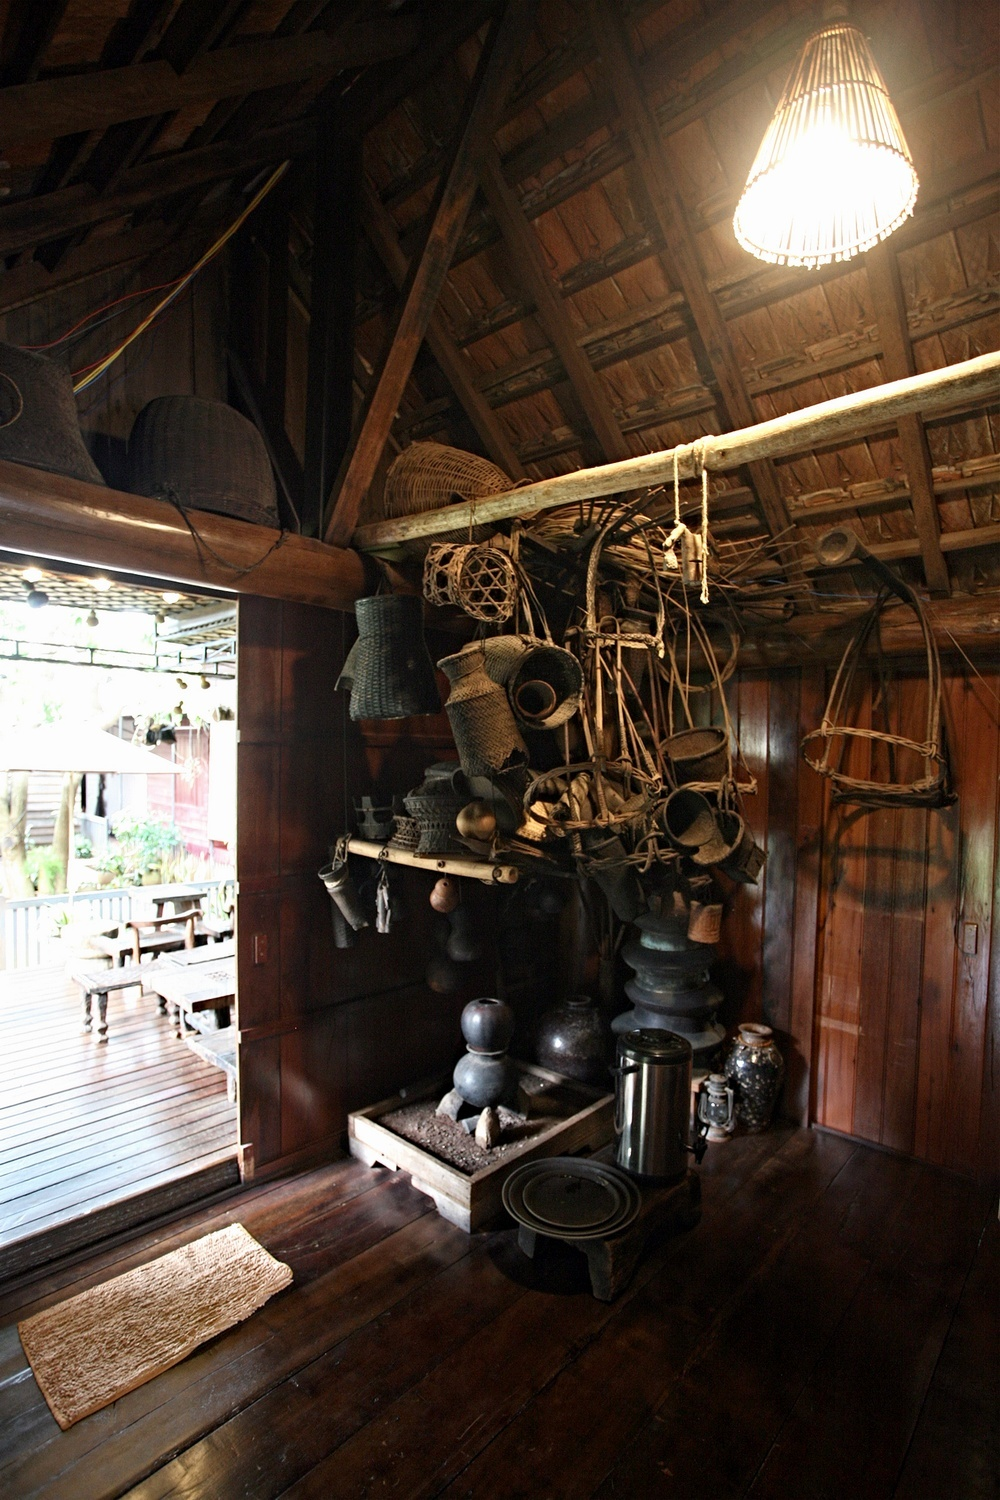 Coffee shop in the Central Highlands traditional longhouses